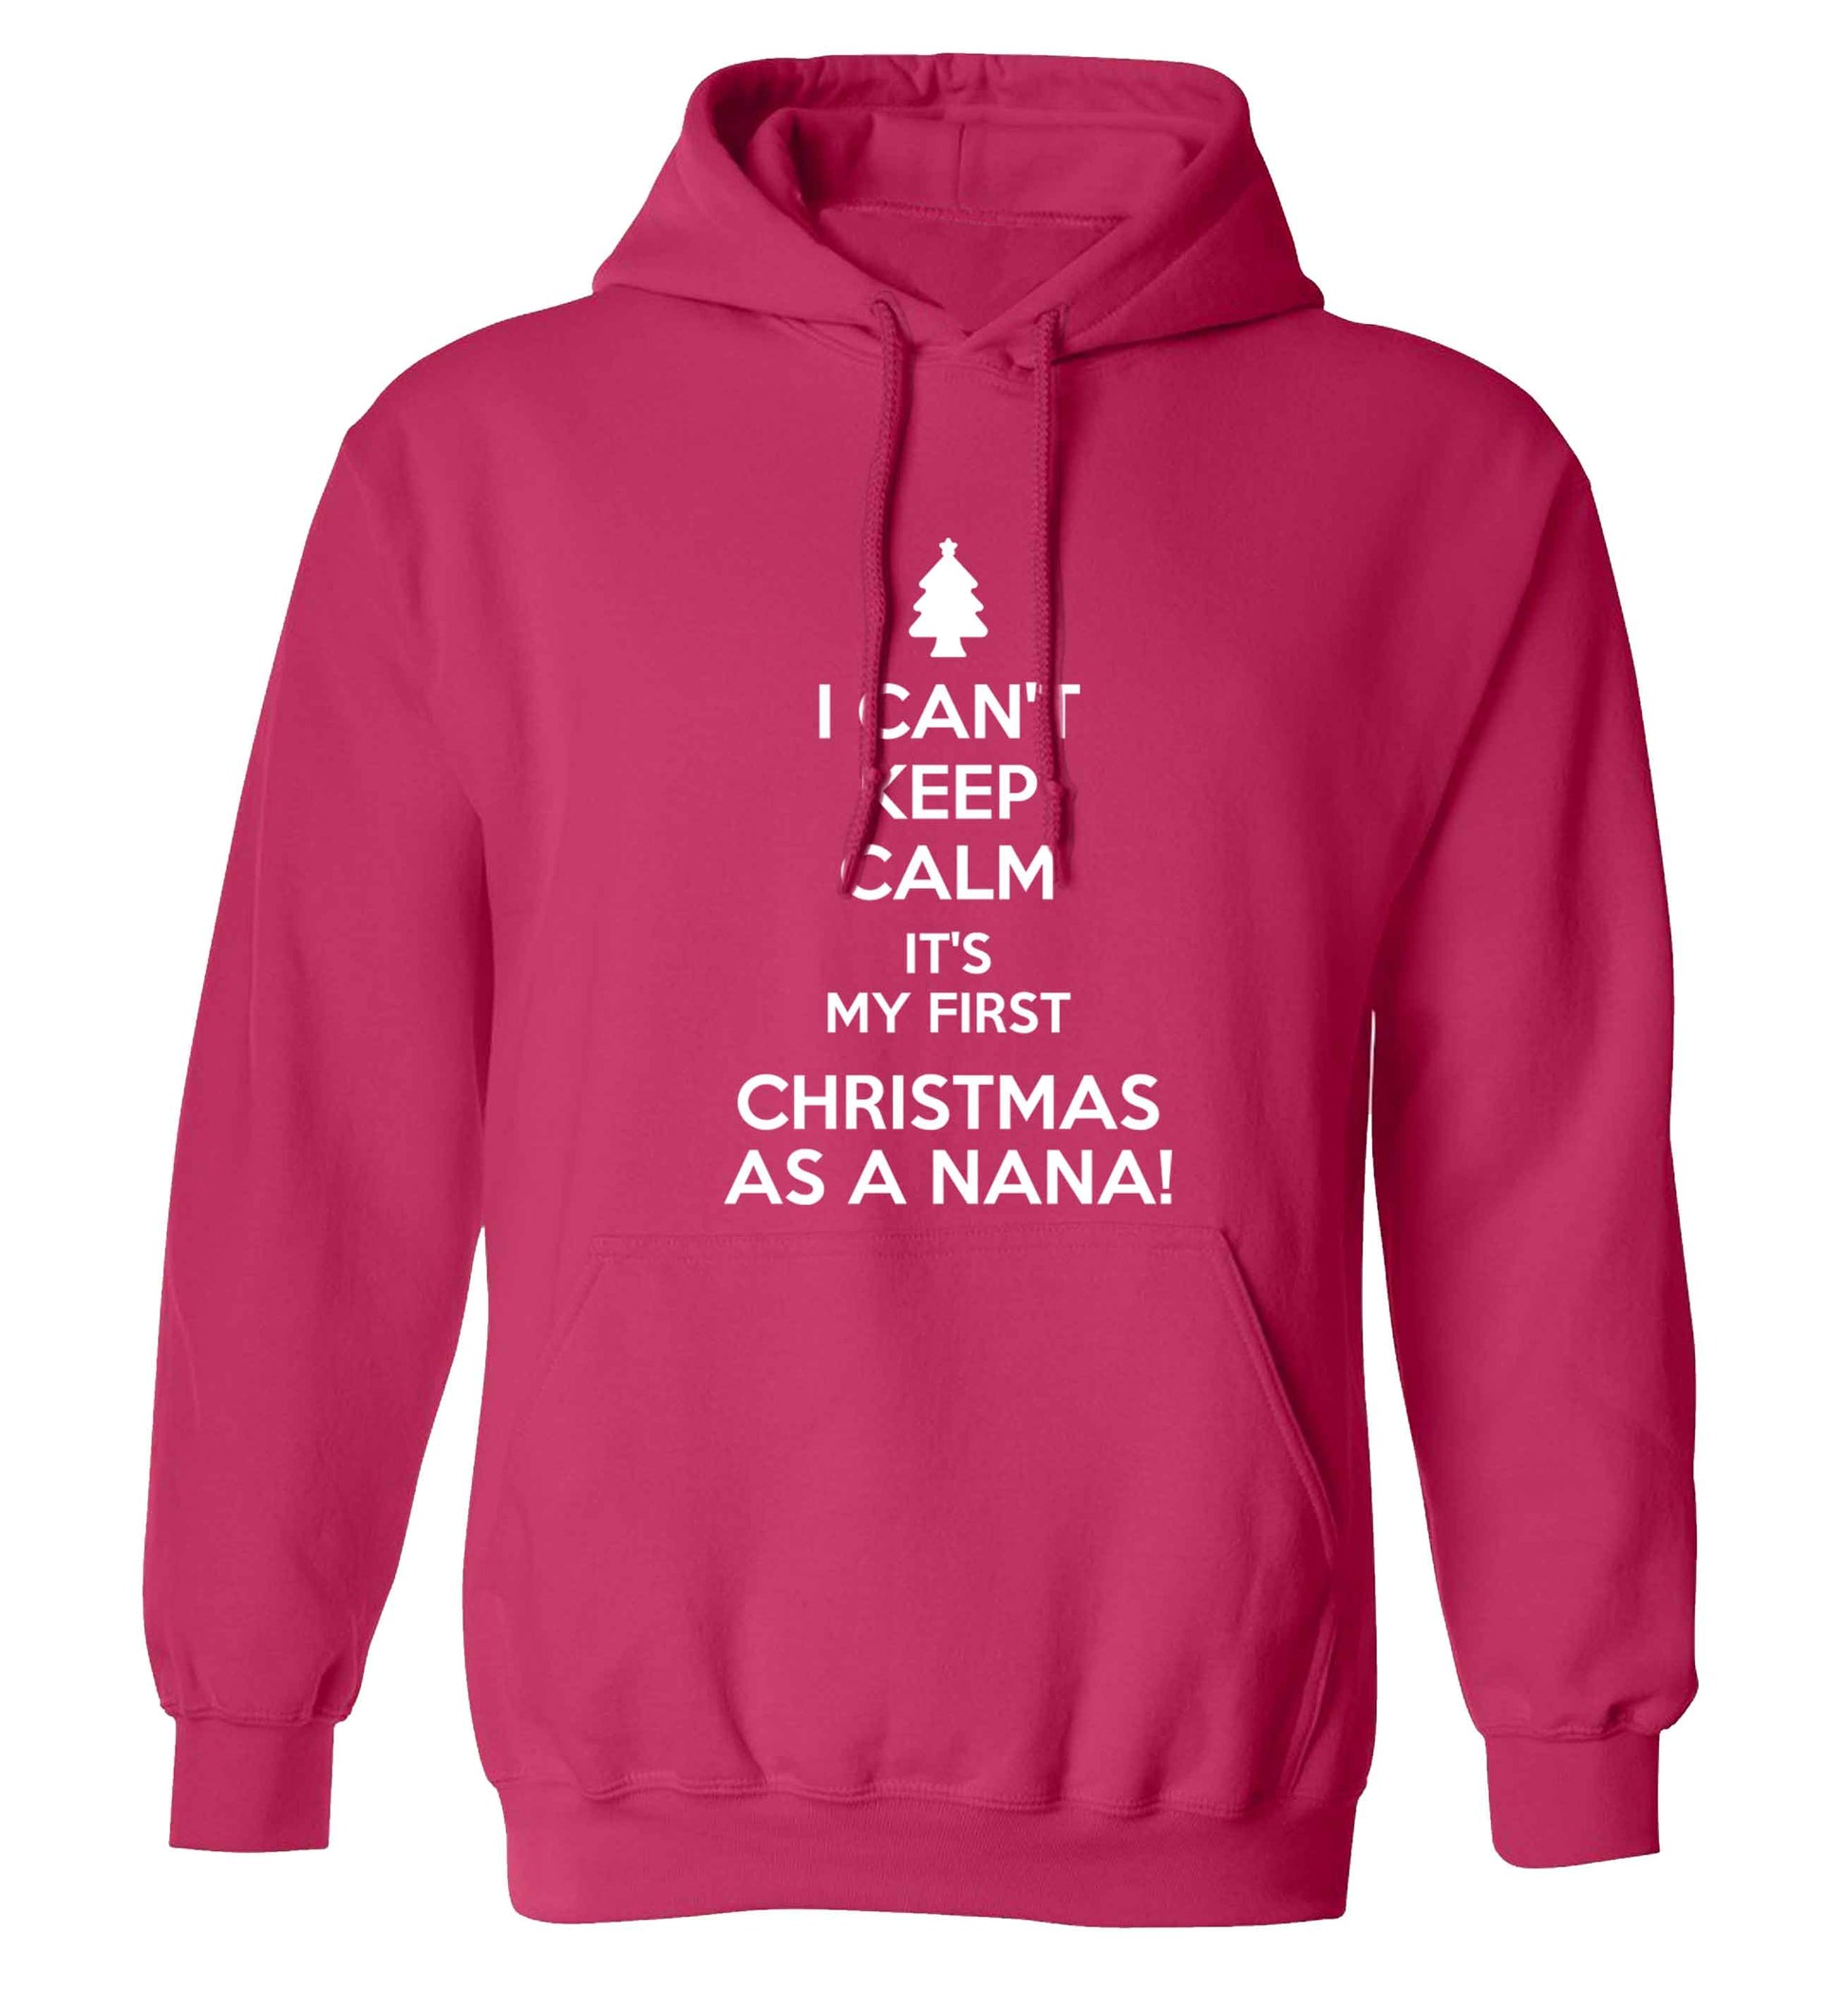 I can't keep calm it's my first Christmas as a nana! adults unisex pink hoodie 2XL